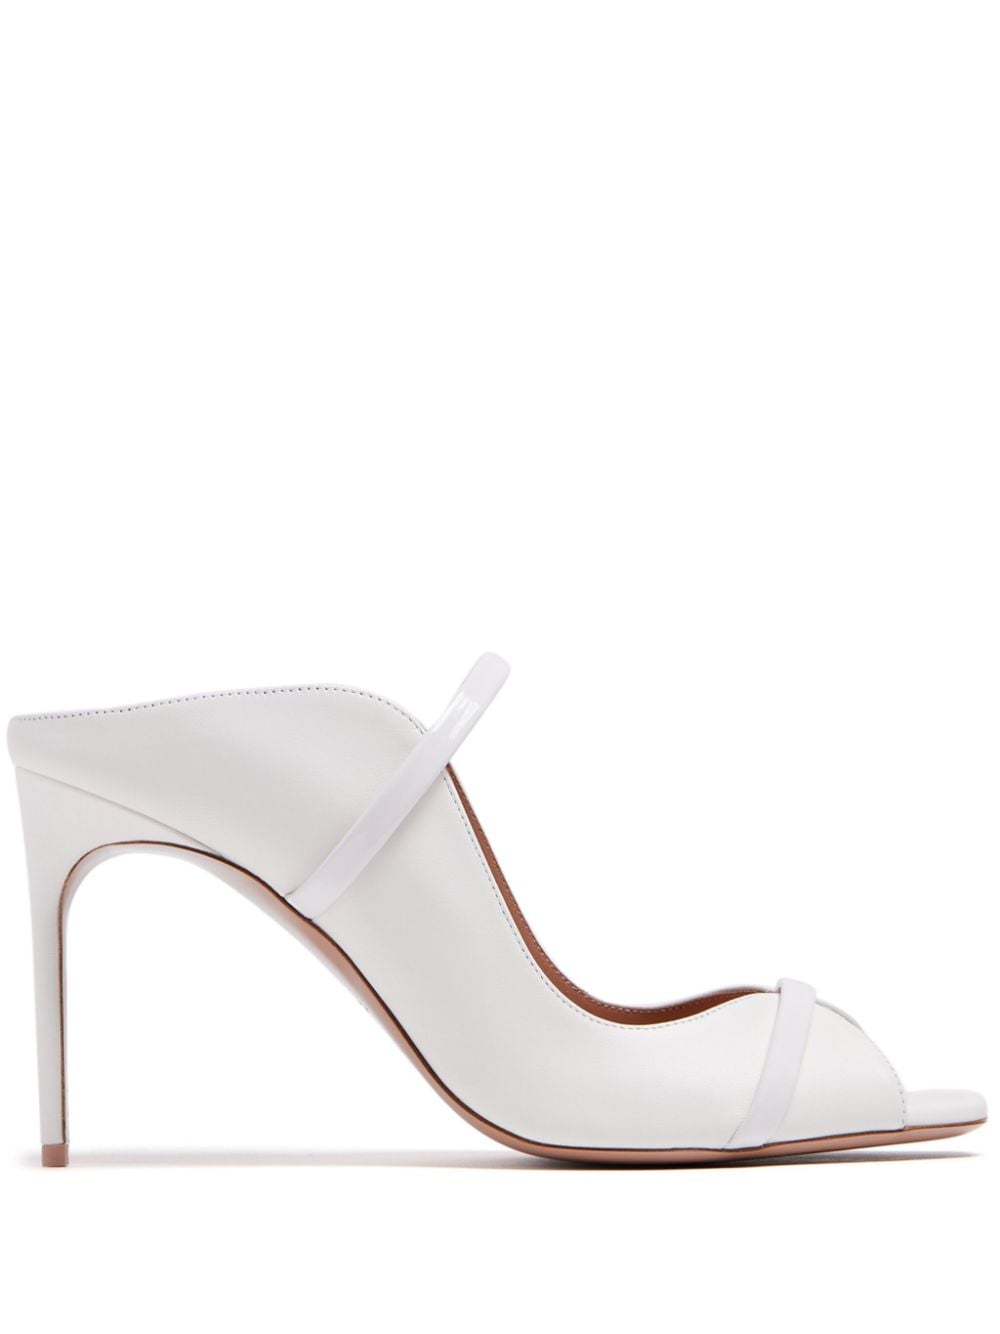 Malone Souliers Noah 90mm leather mules - White von Malone Souliers